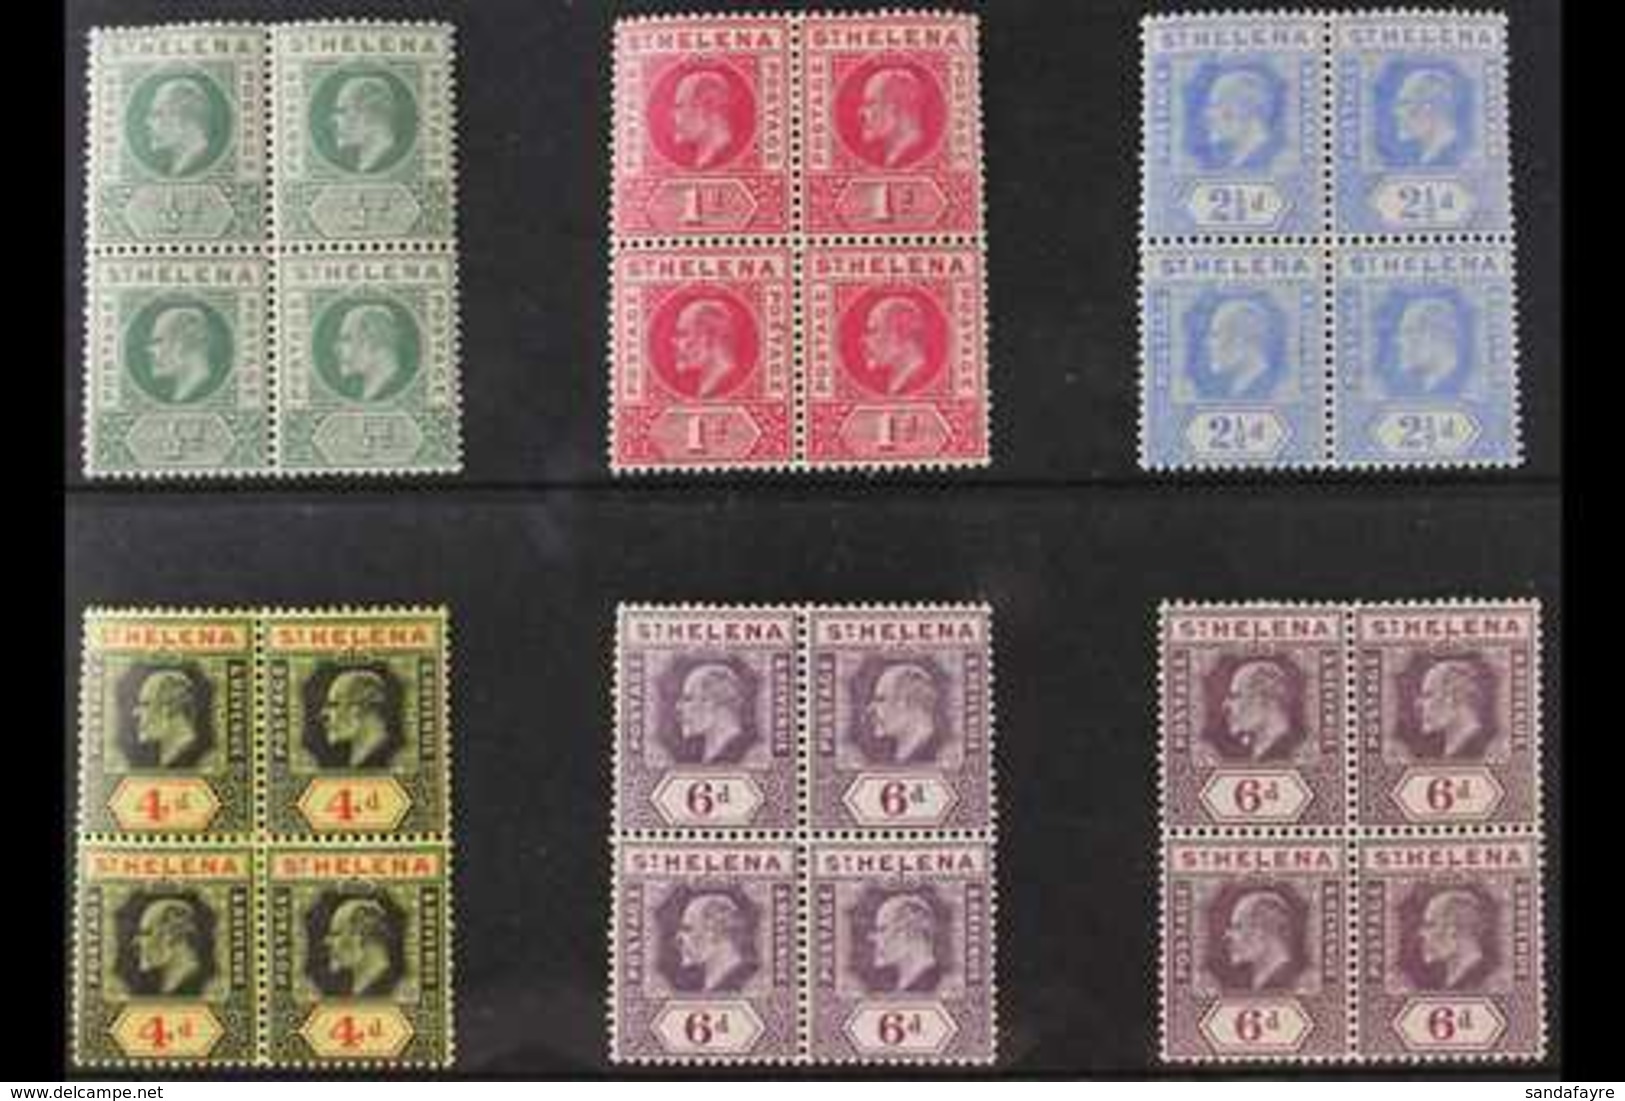 1902-11 BLOCKS OF 4. A Delightful Group Presented On A Stock Card That Includes The 1902 Set With ½d Green & 1d Carmine, - Sainte-Hélène